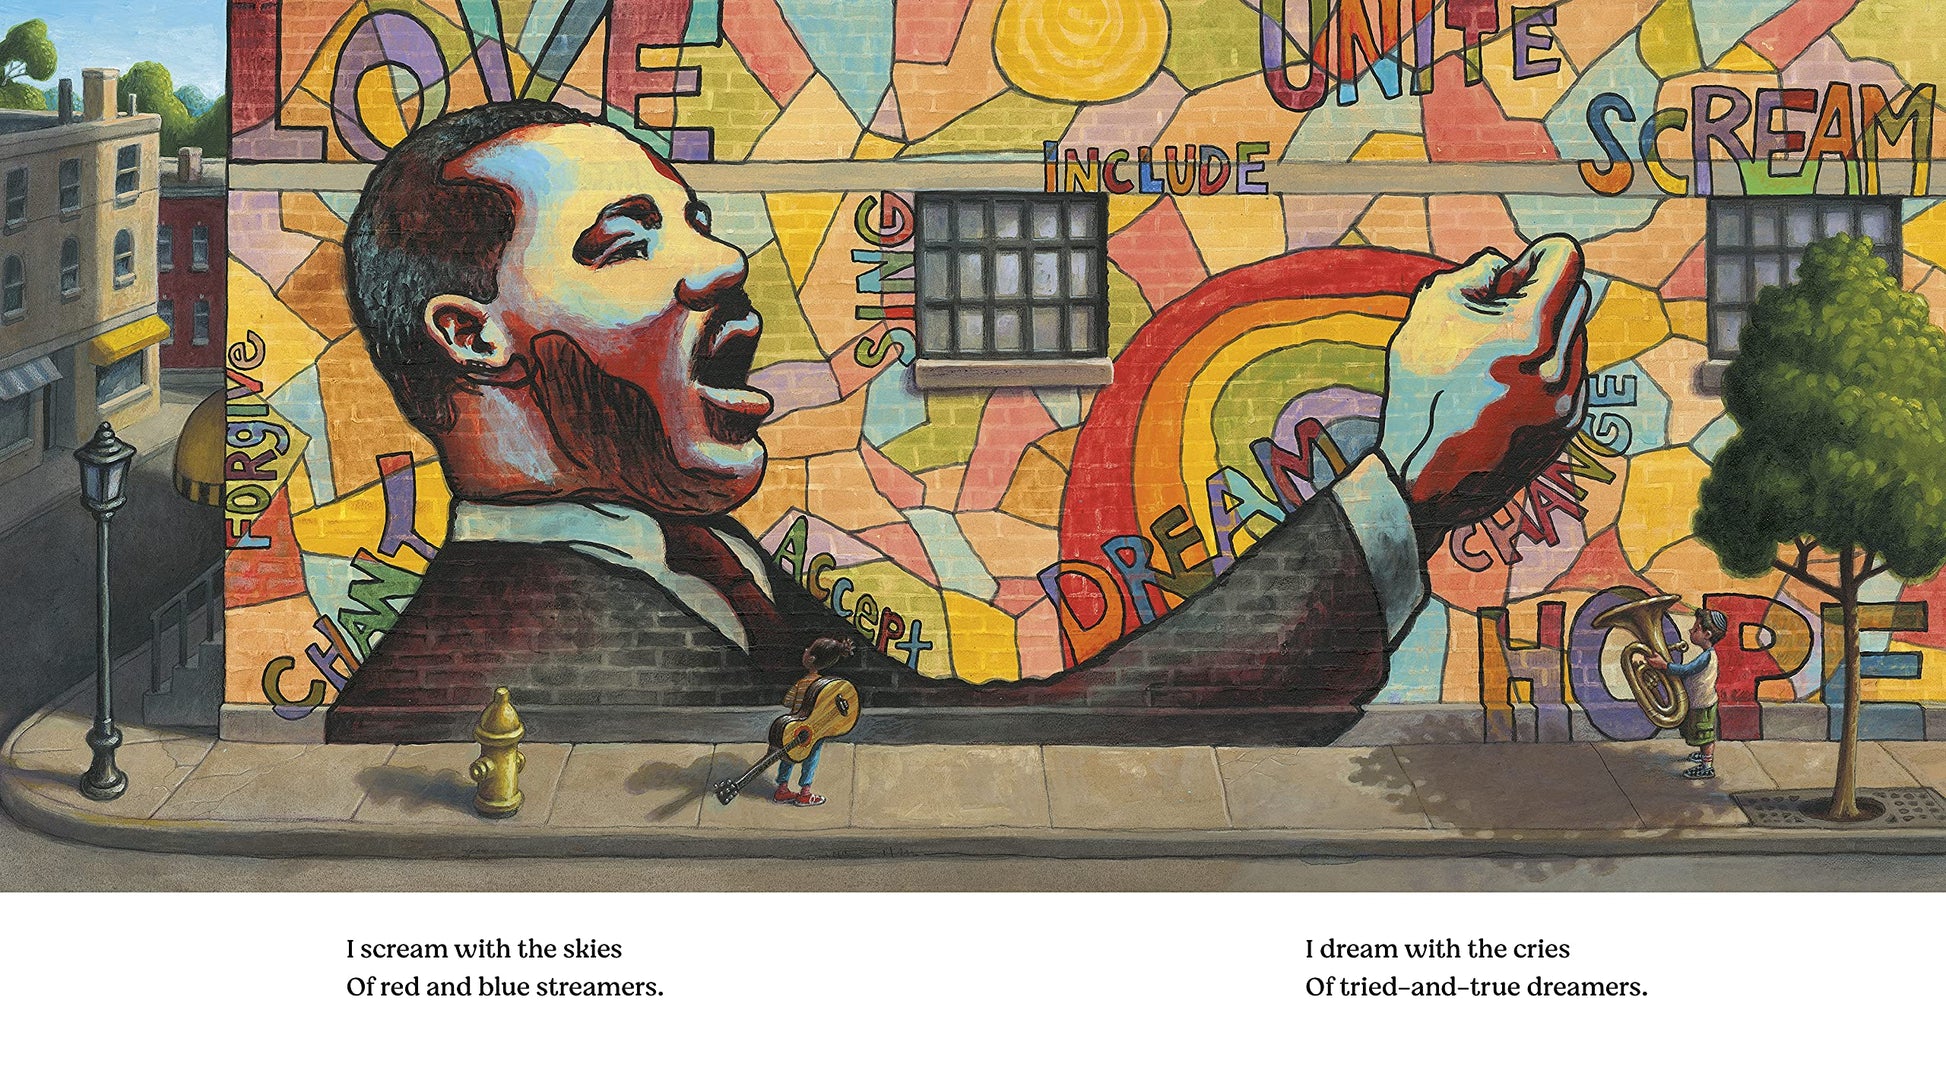 Inside page from ‘Change Sings: A Children's Anthem’ featuring a colorful wall mural of MLK Jr.